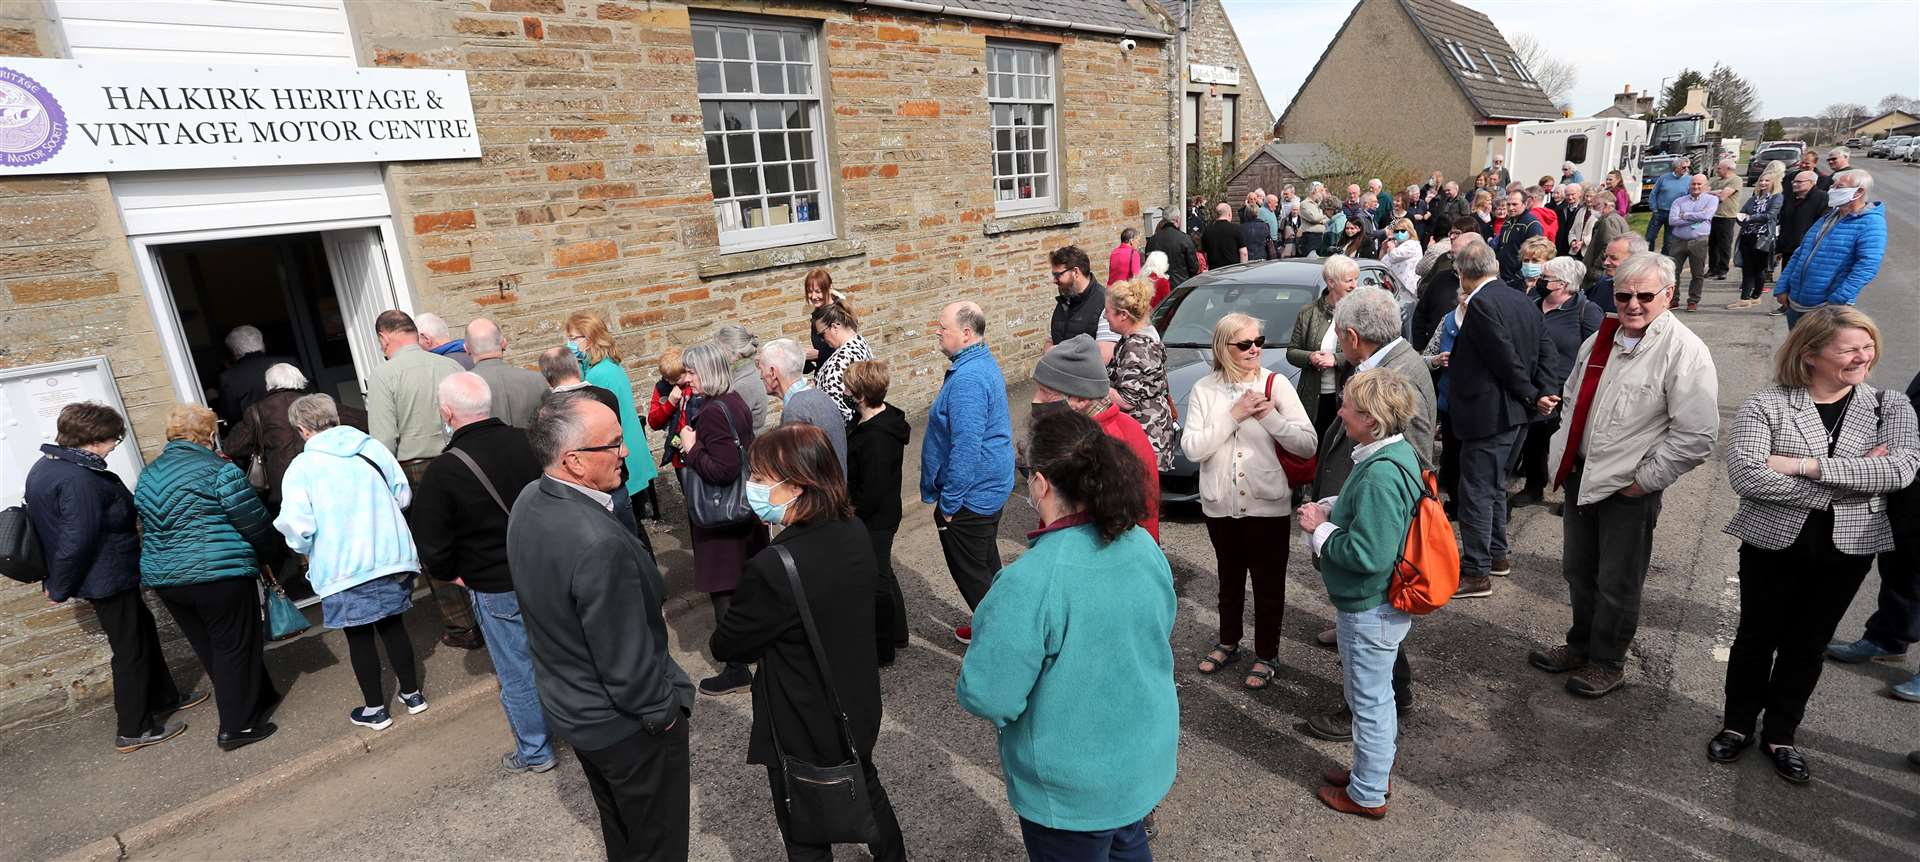 Members of the public throng into the new Halkirk Heritage and Vintage Motor Centre after the official opening on Saturday. Picture: James Gunn